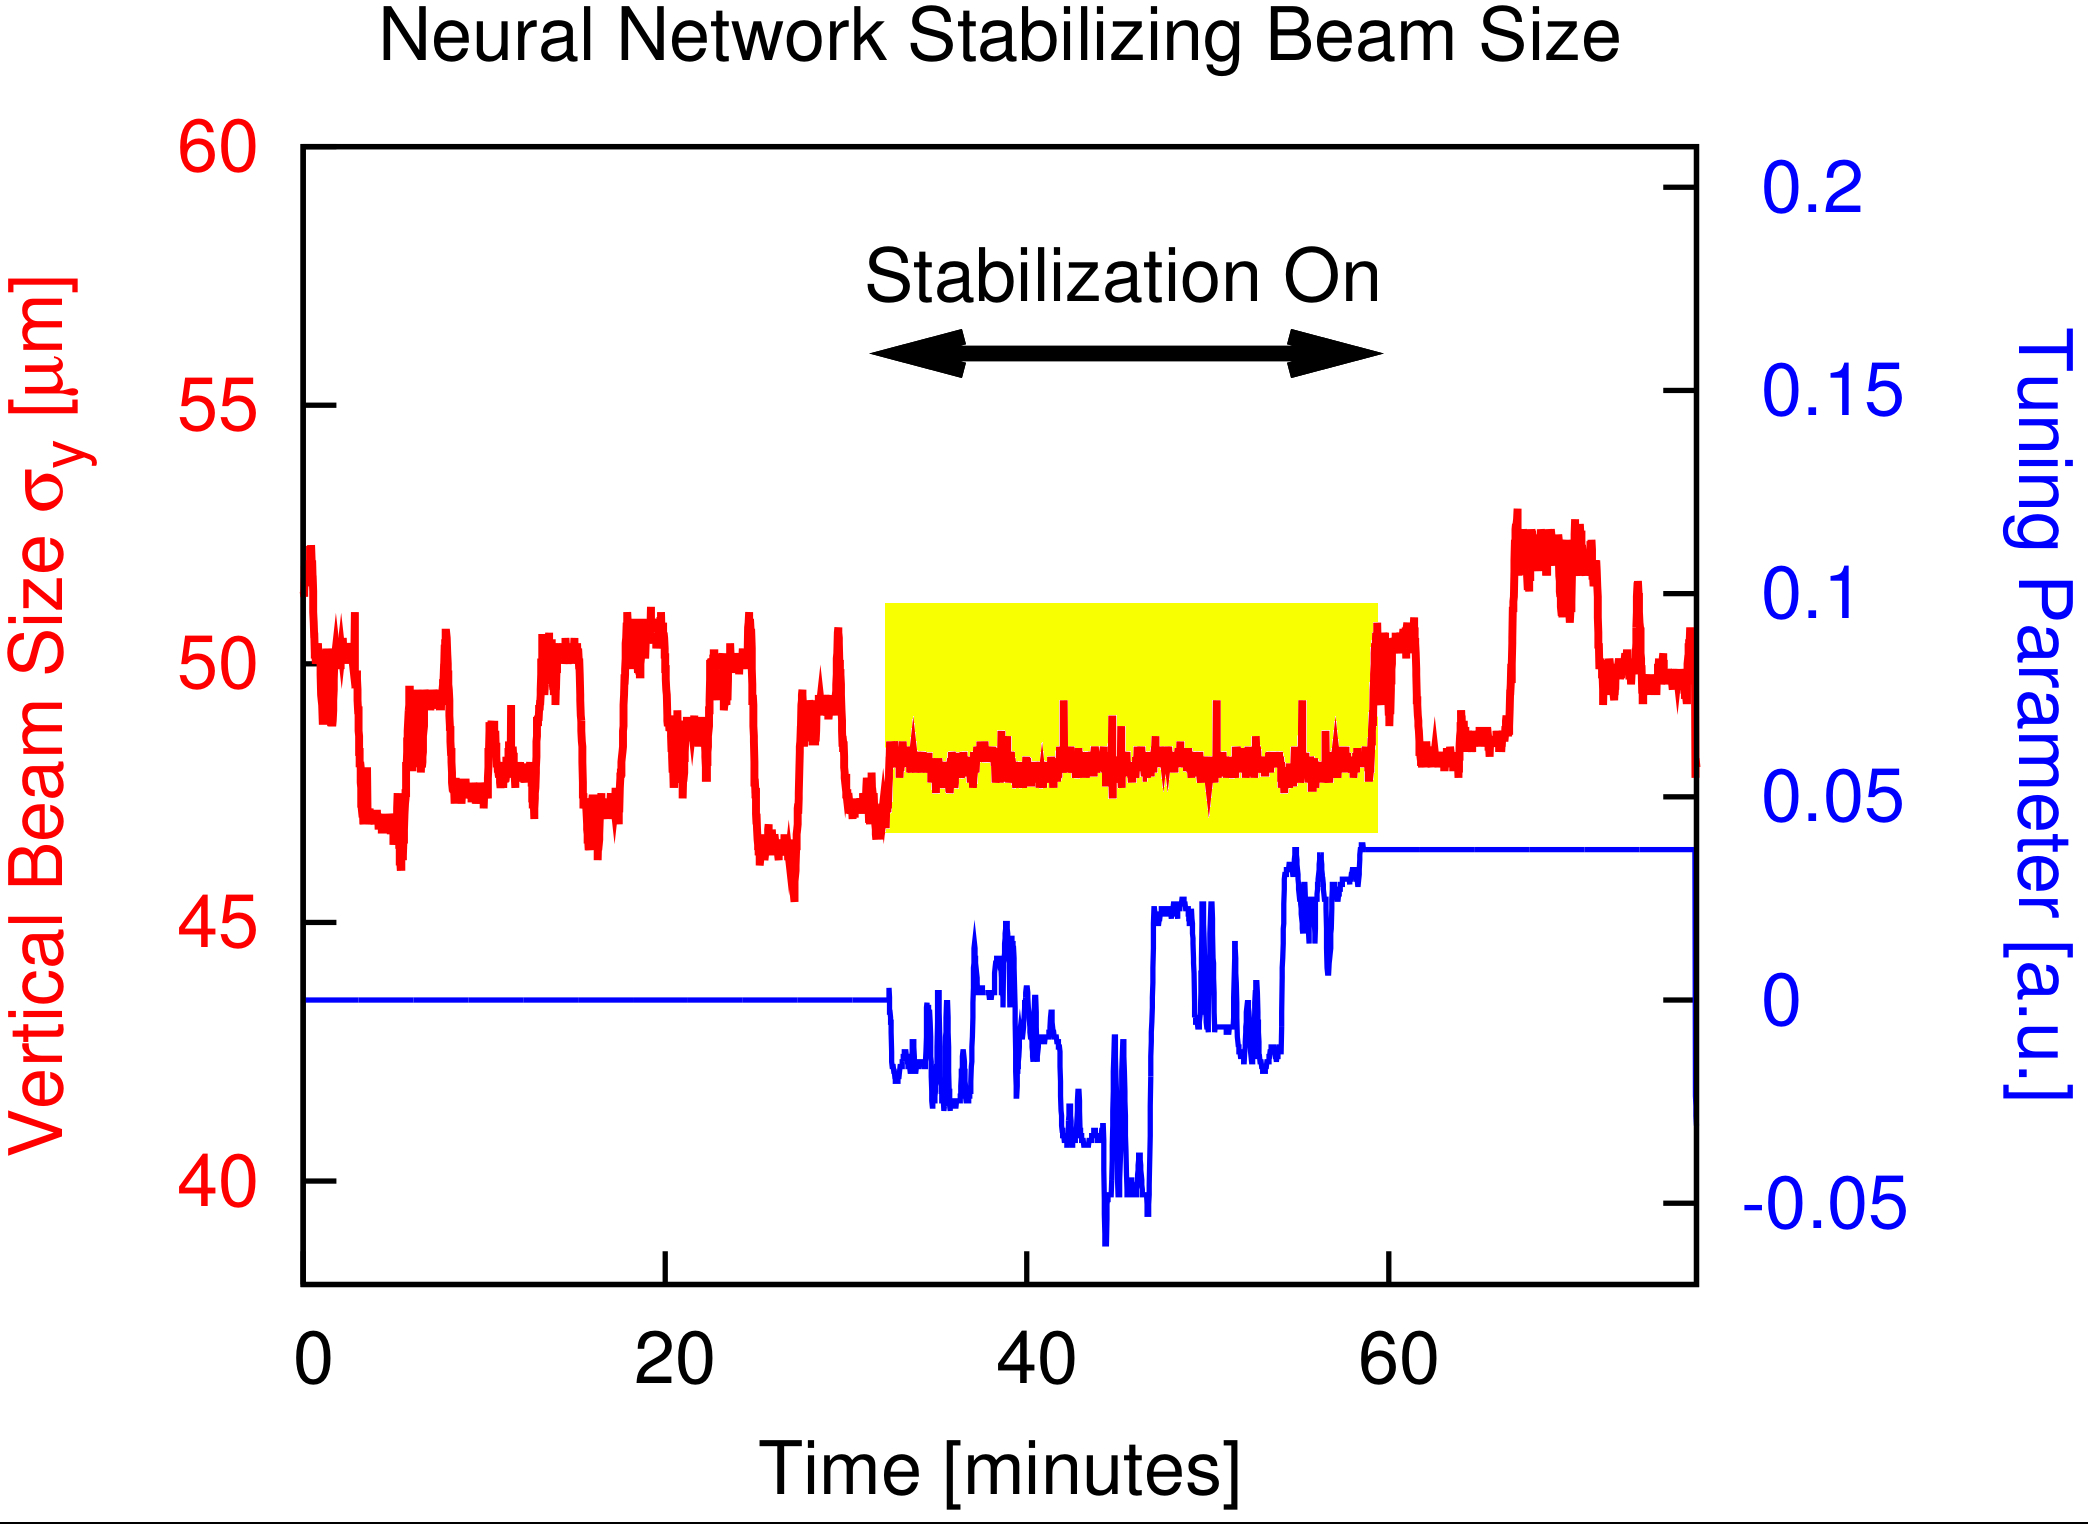 Image - This chart shows how vertical beam-size stability greatly improves when a neural network is implemented during Advanced Light Source operations. When the so-called “feed-forward” correction is implemented, the fluctuations in the vertical beam size are stabilized down to the sub-percent level (see yellow-highlighted section) from levels that otherwise range at several percent. (Credit: Lawrence Berkeley National Laboratory)